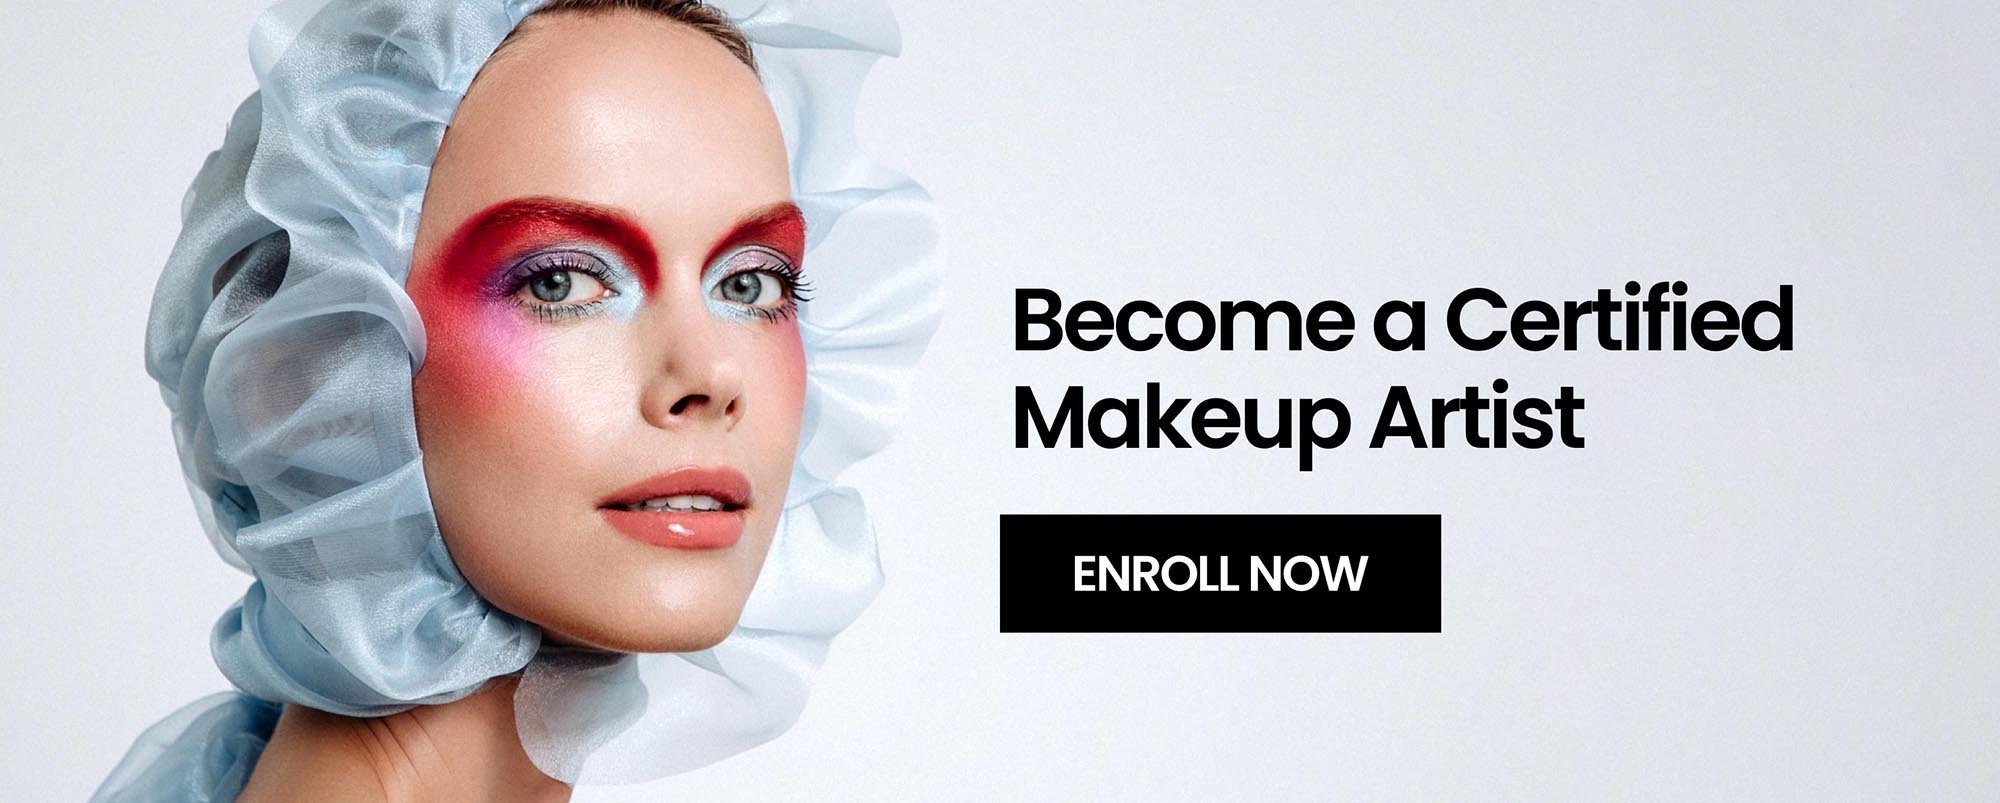 How To Become A Makeup Artist